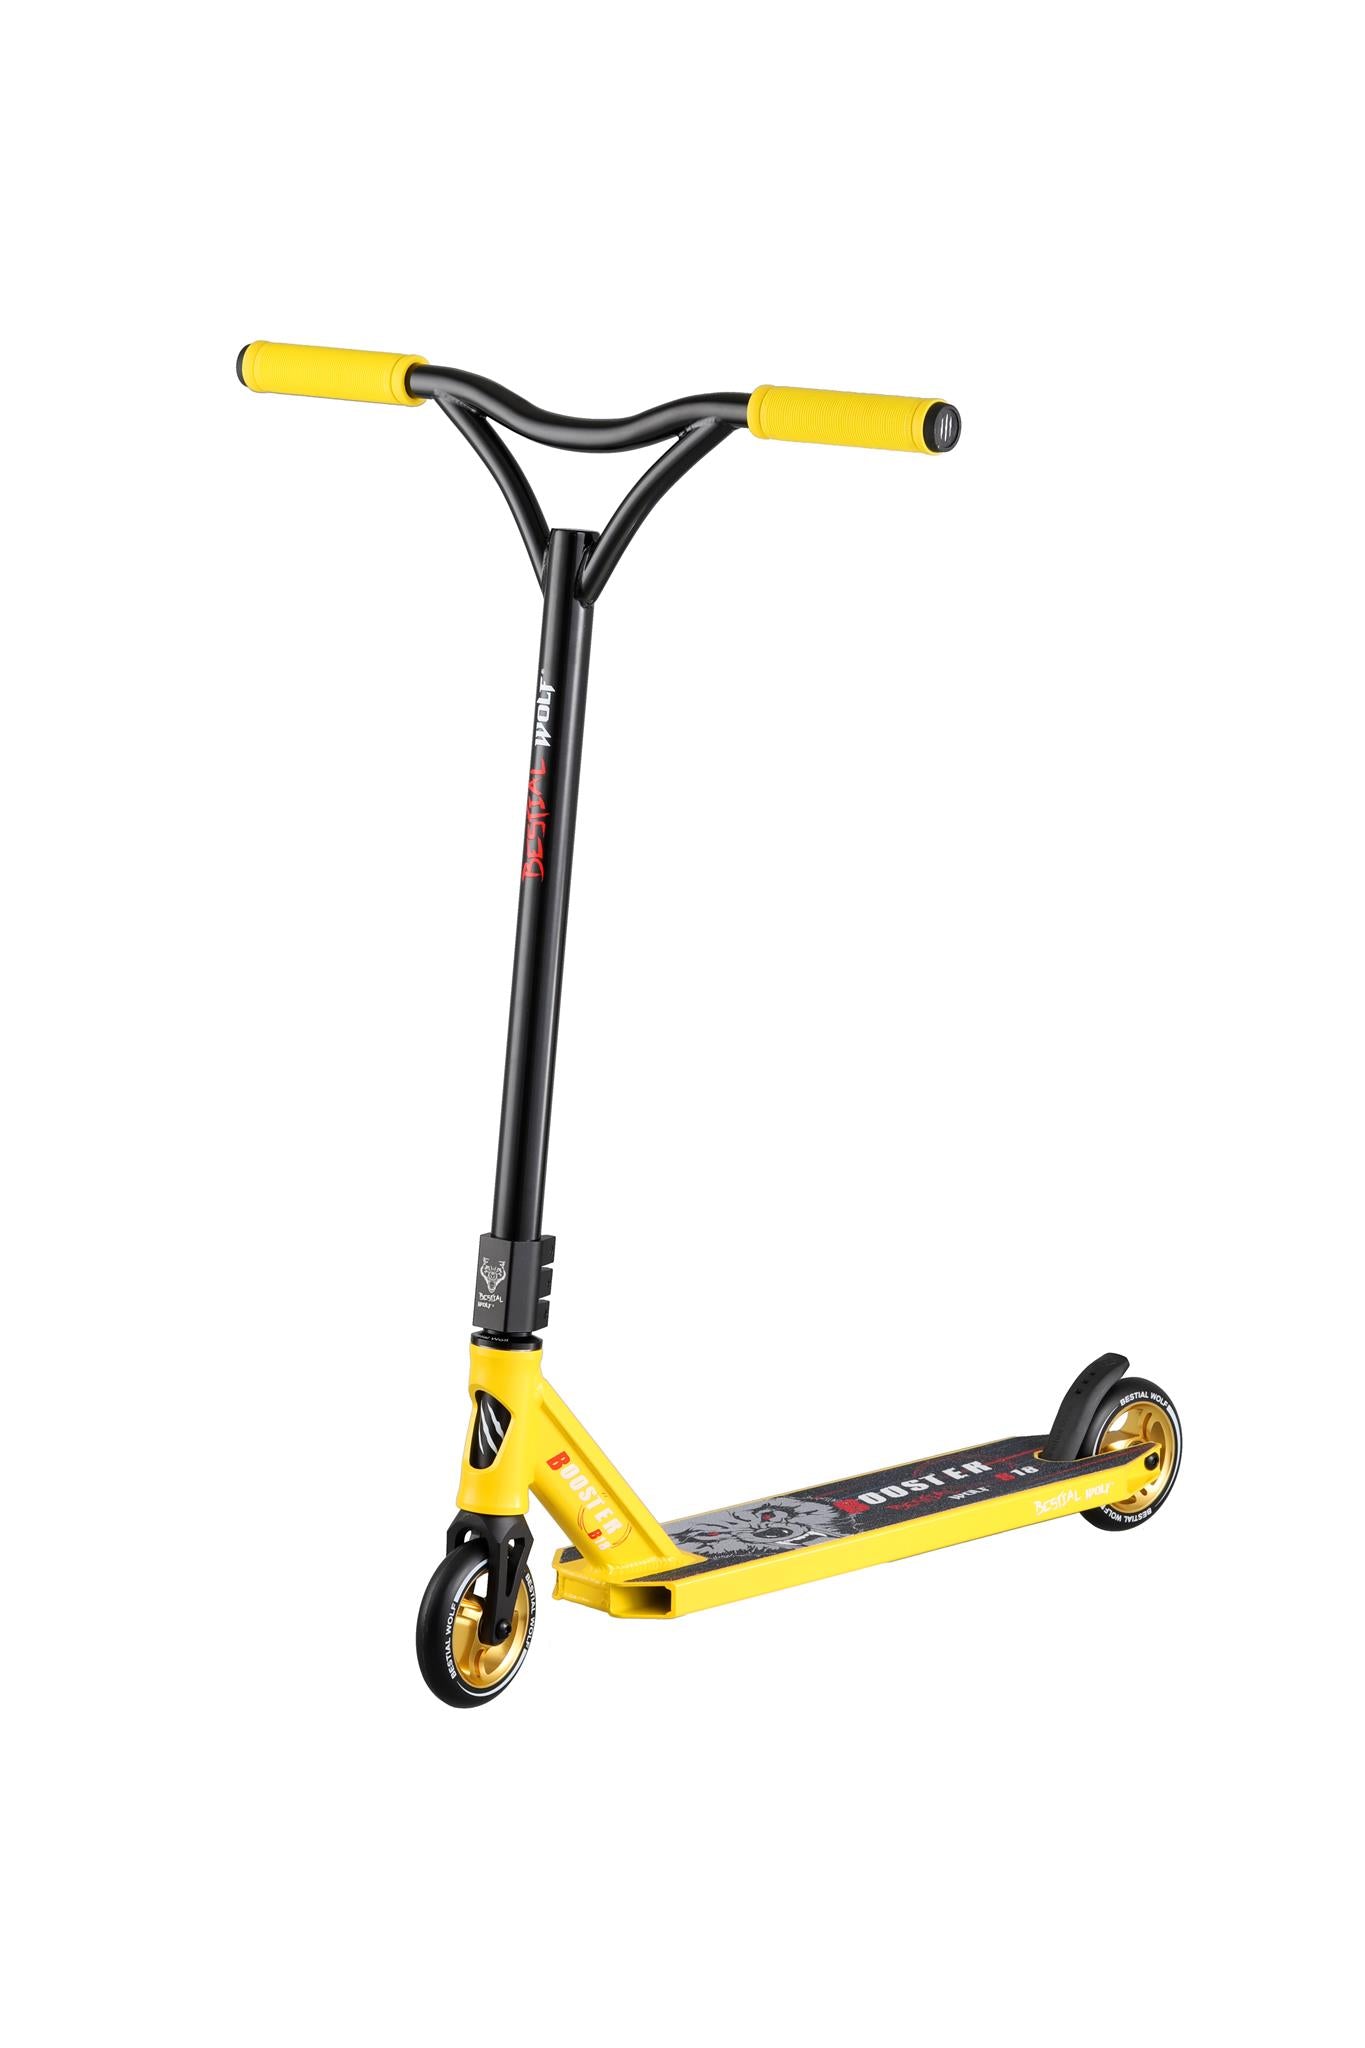 SCOOTER BOOSTER B18 AMARILLO Y NEGRO